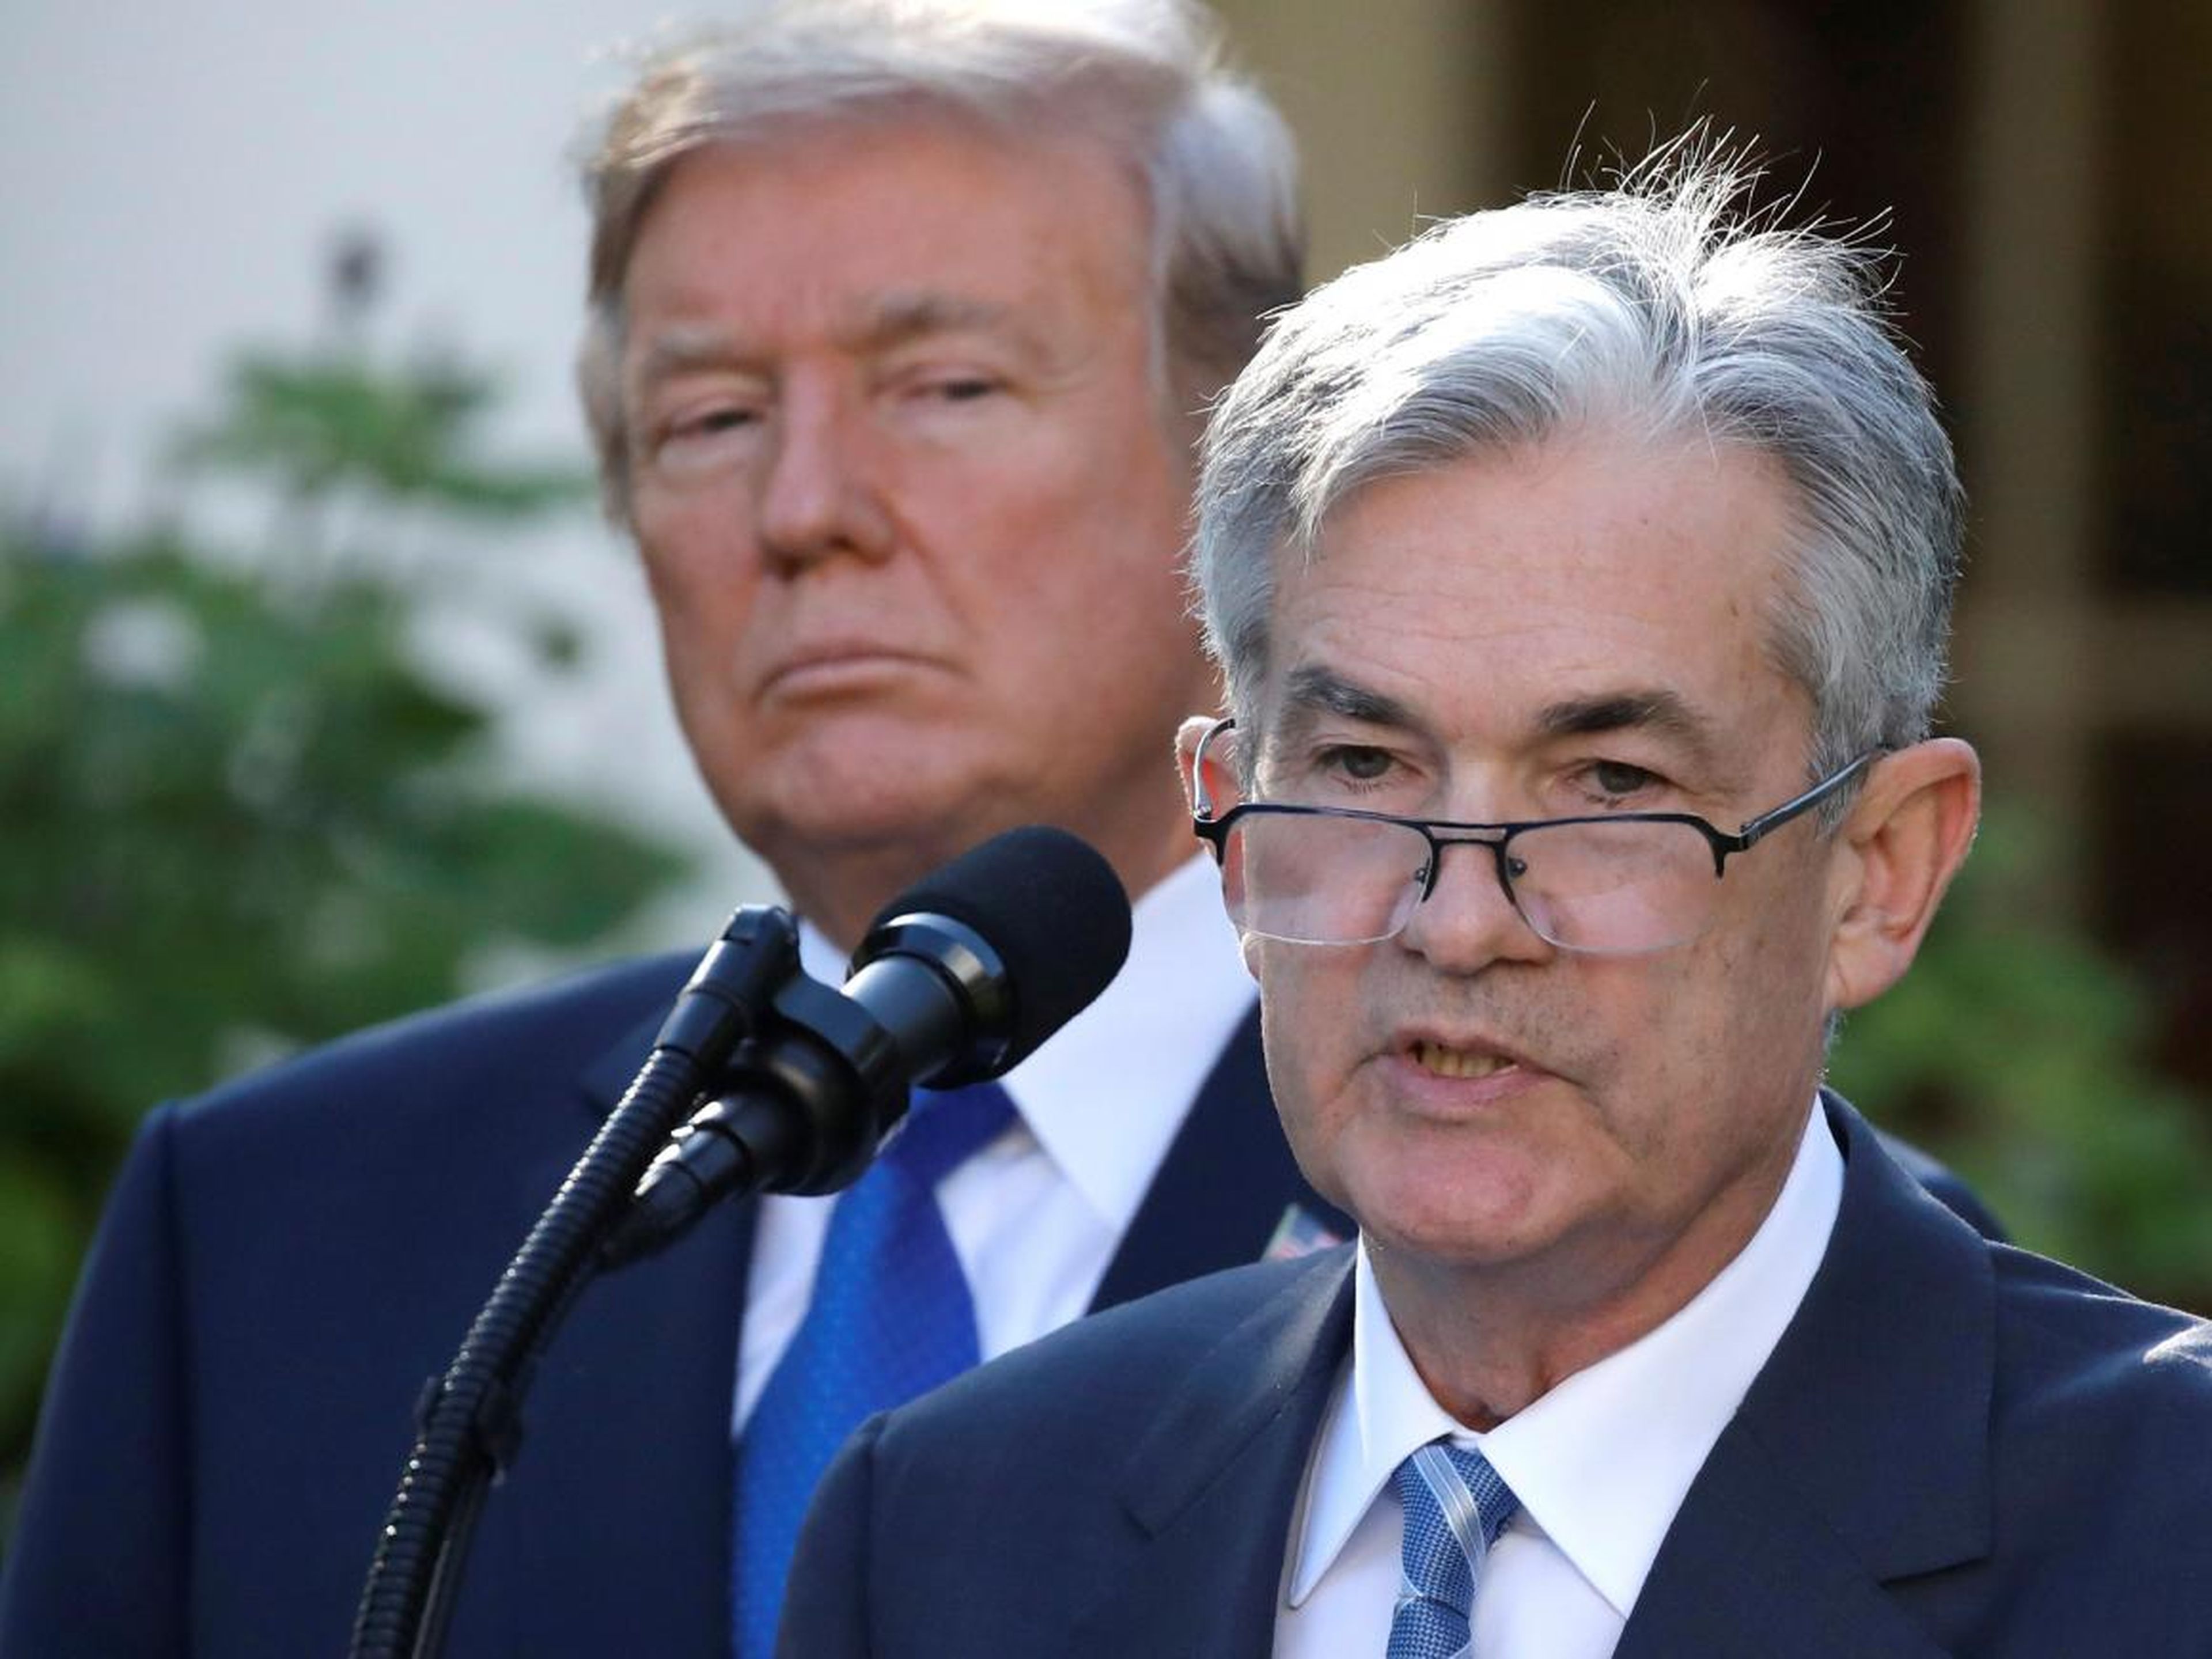 3. Trump tells Powell: "You’re fired"